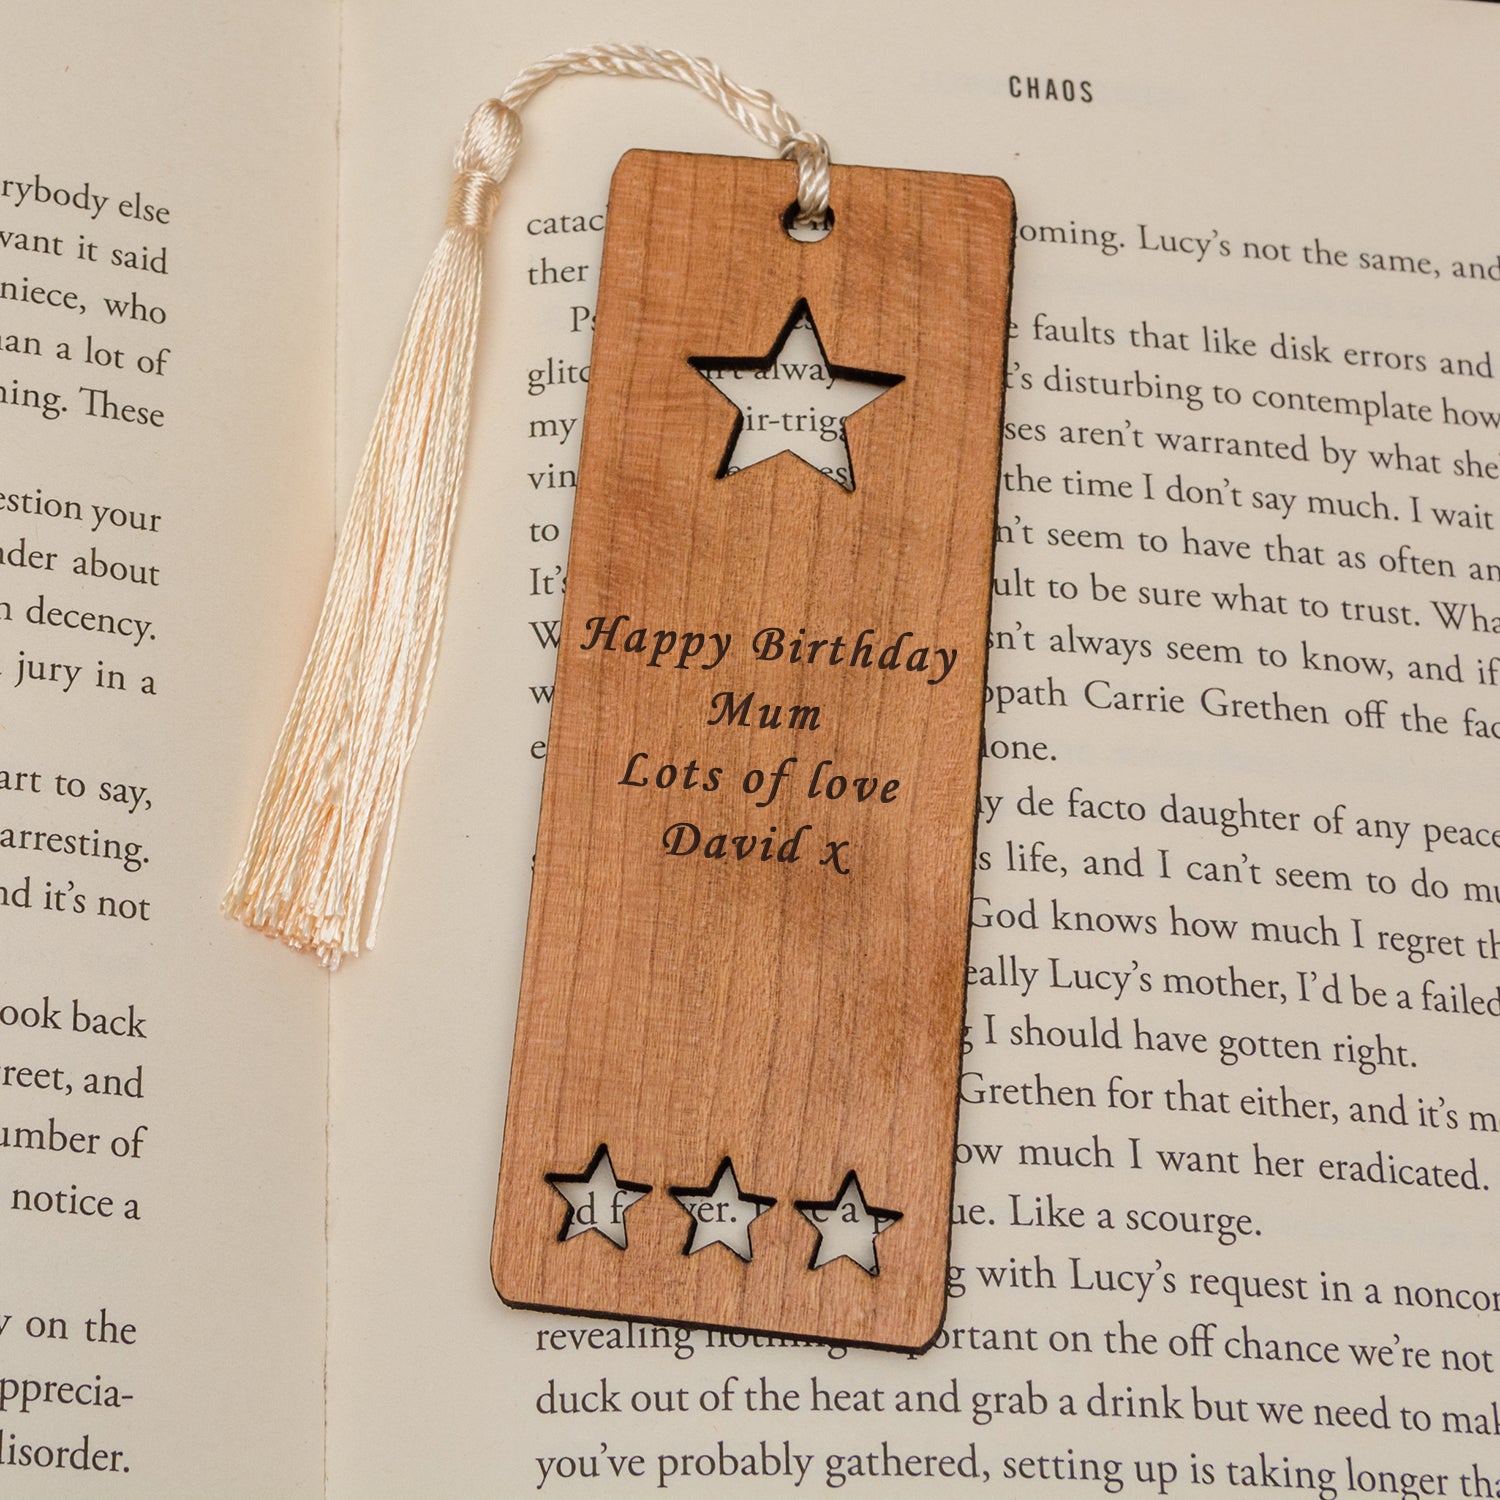 Personalised Wooden Bookmark - Your Message